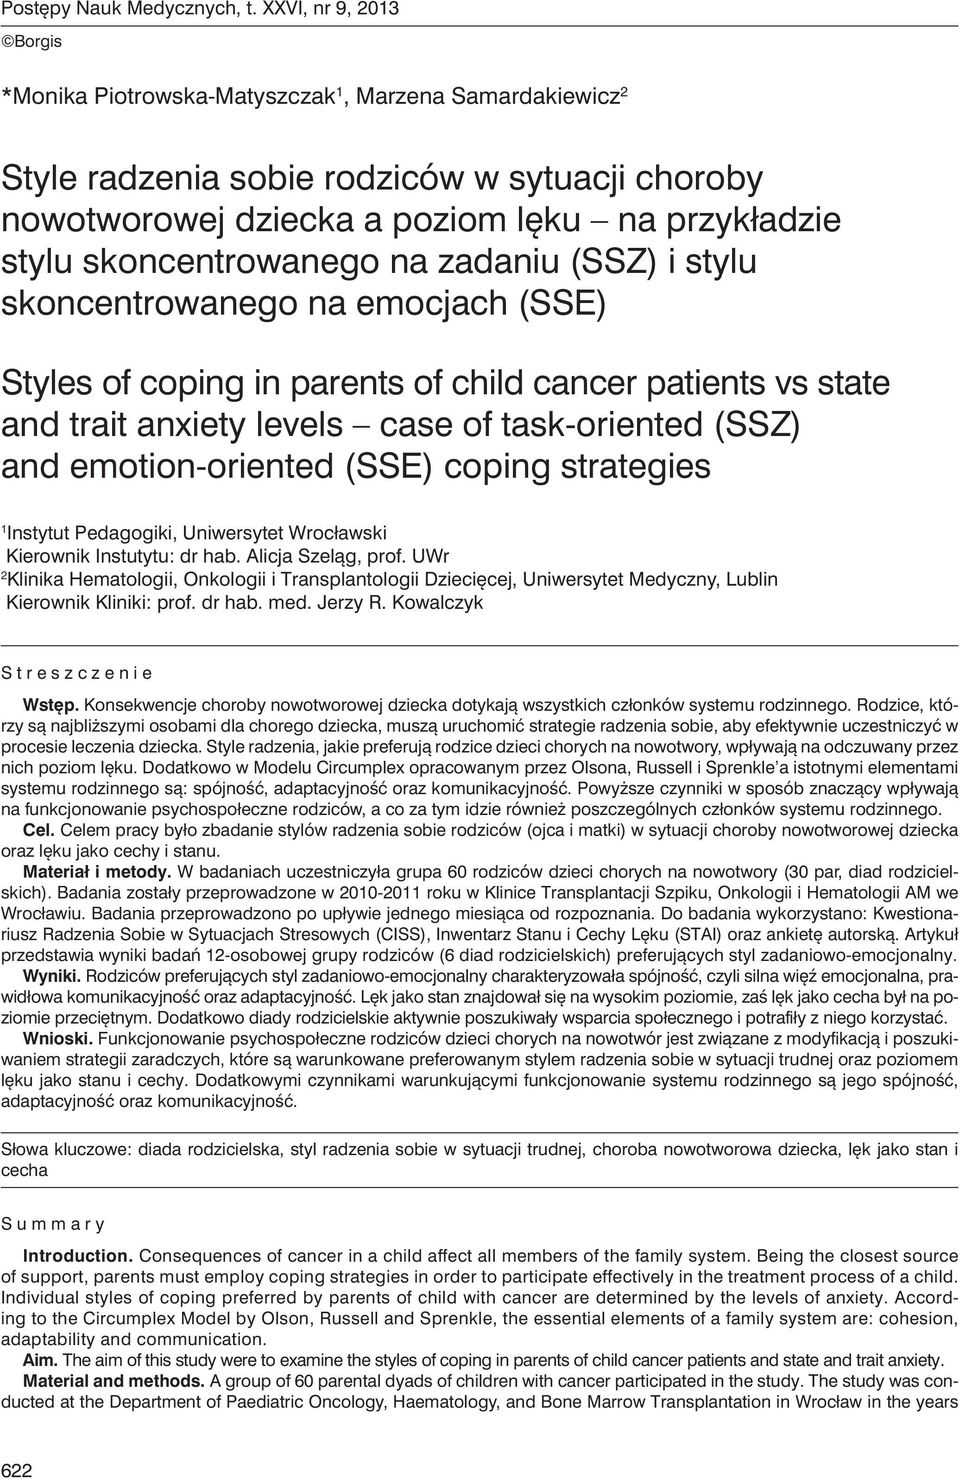 skoncentrowanego na zadaniu (SSZ) i stylu skoncentrowanego na emocjach (SSE) Styles of coping in parents of child cancer patients vs state and trait anxiety levels case of task-oriented (SSZ) and